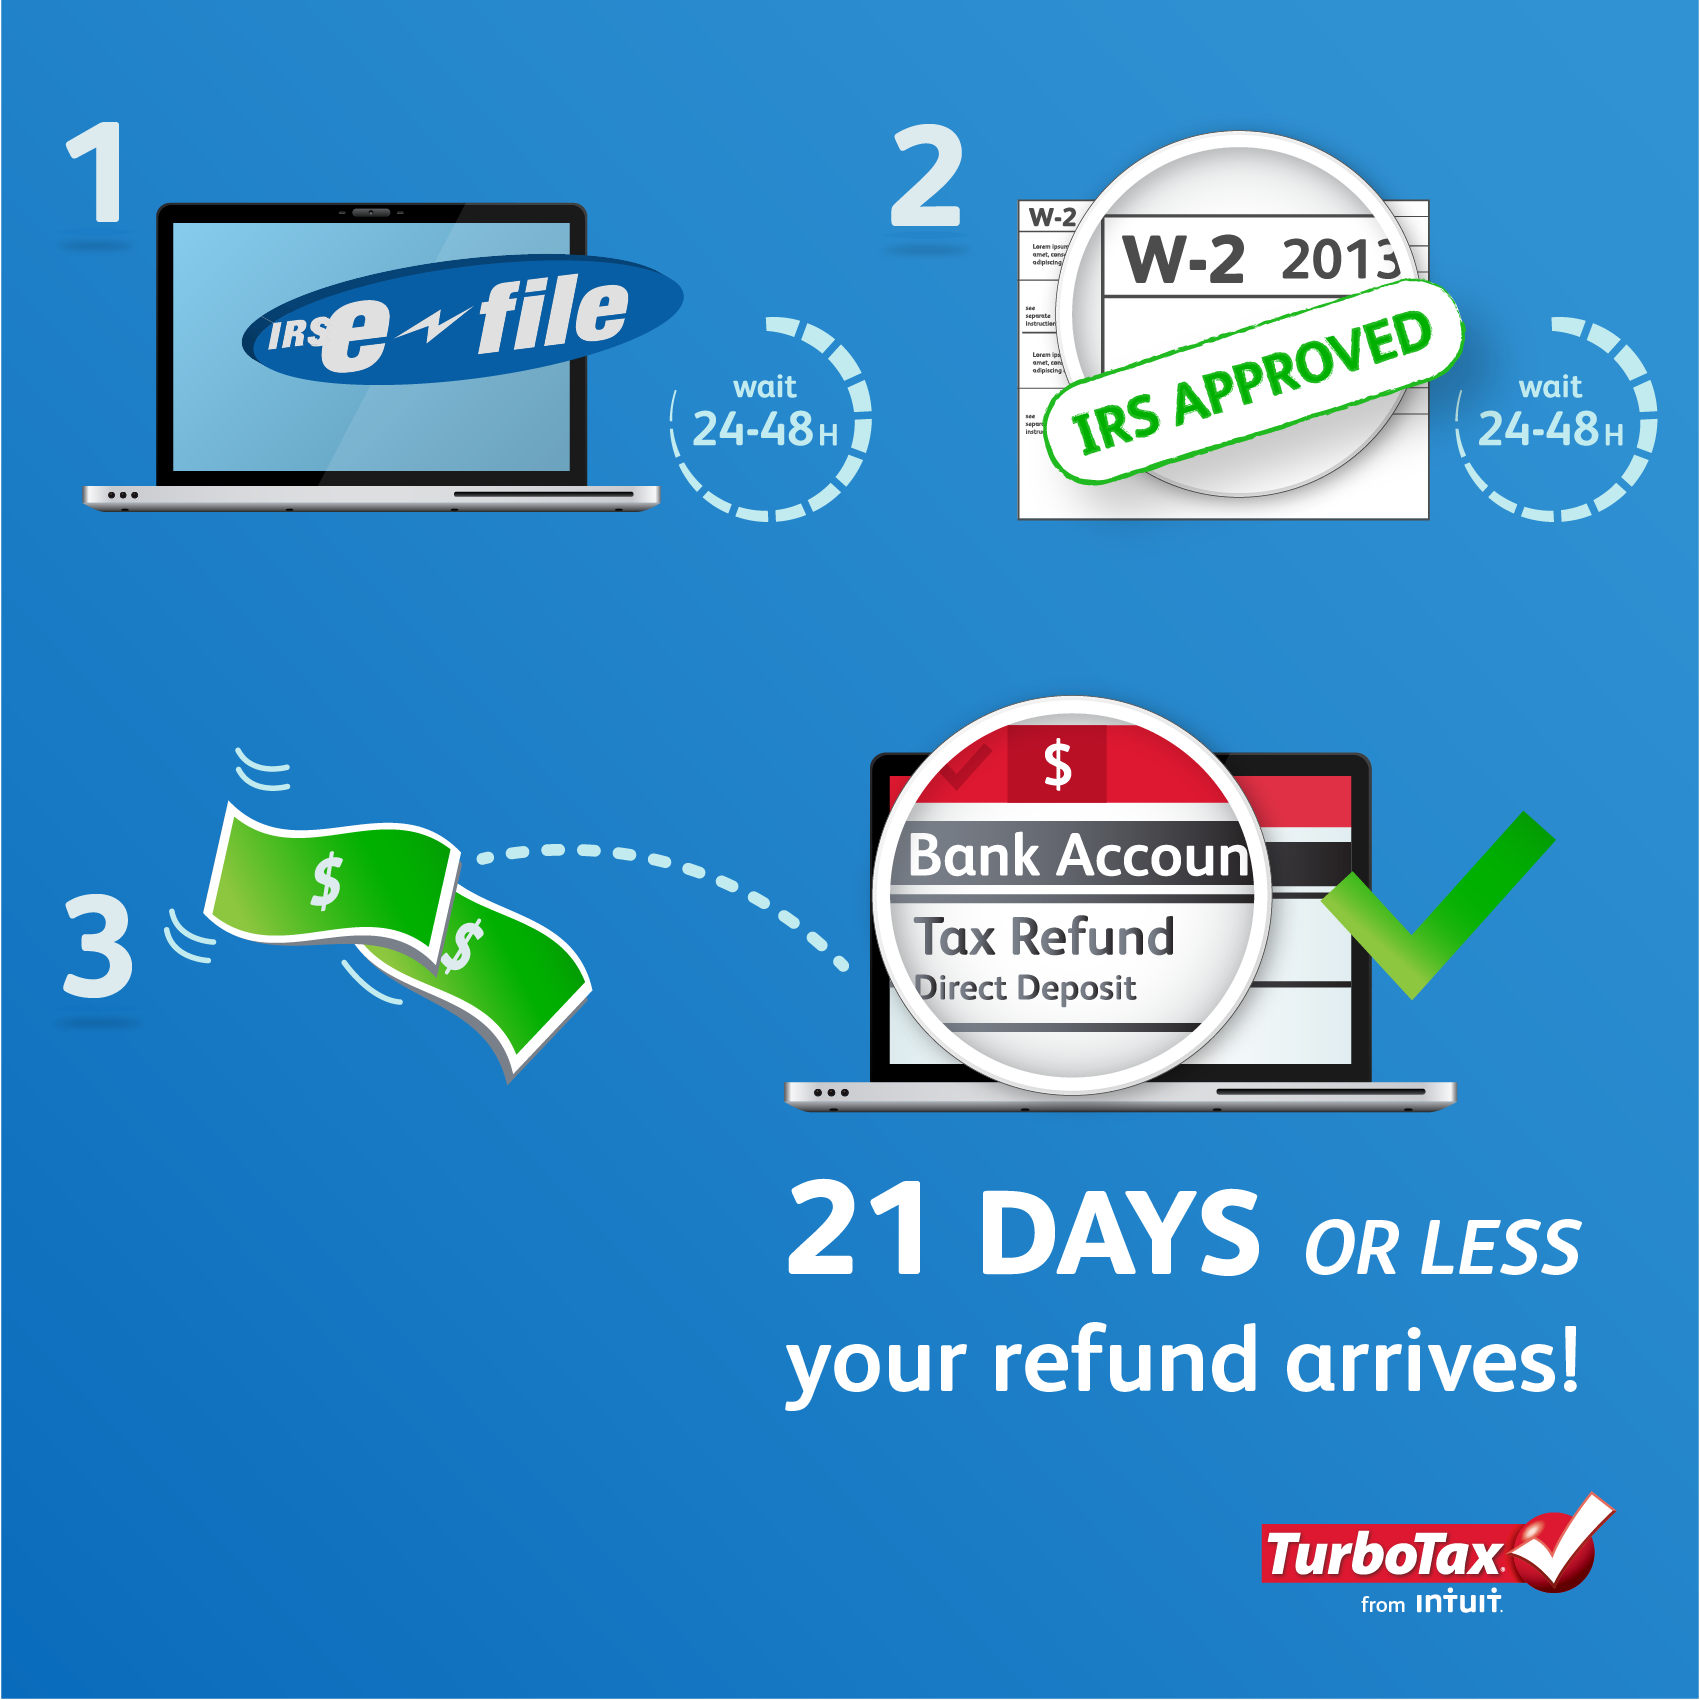 turbotax-refund-turbotax-has-turned-off-the-ability-of-its-software